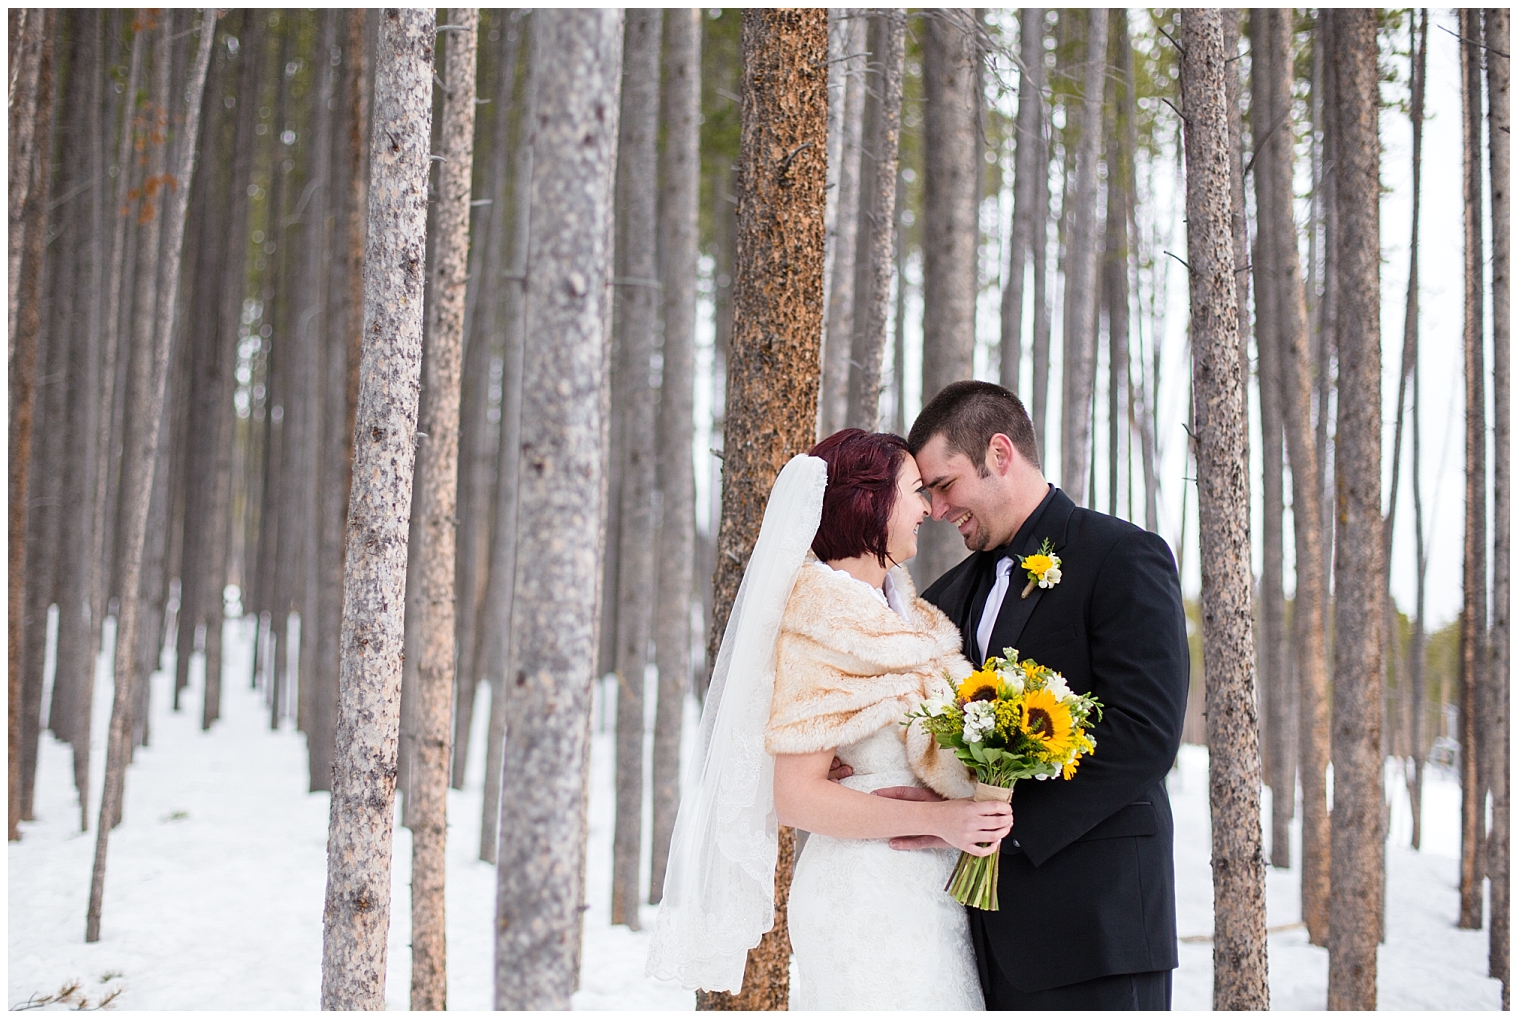 The bride and groom stand together in the trees at their Colorado winter wedding.